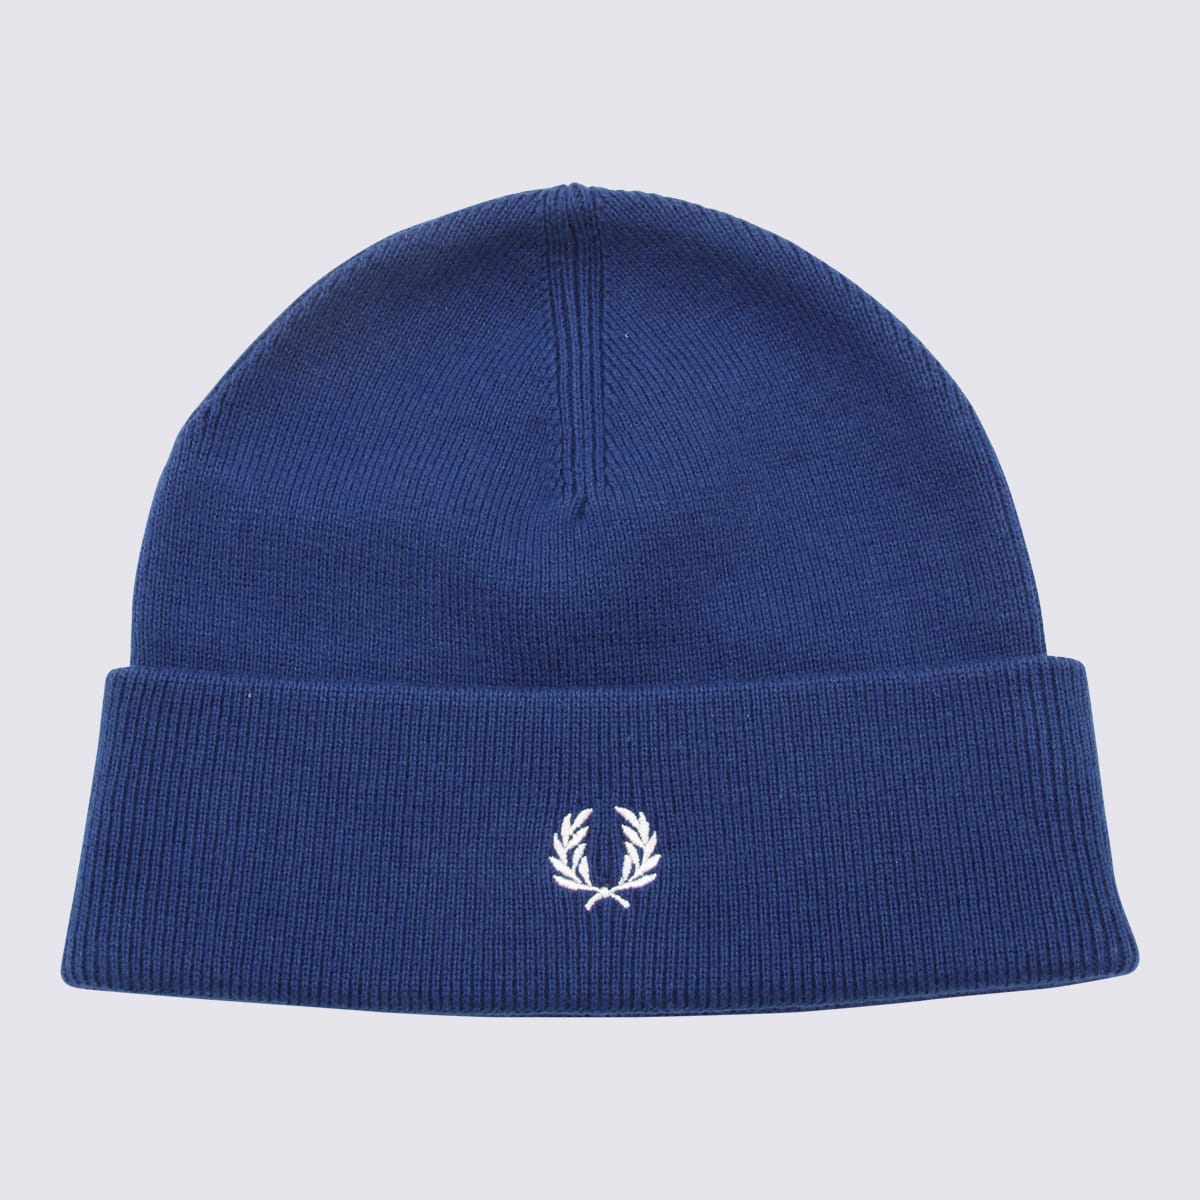 Navy Blue And White Cotton-wool Blend Beanie